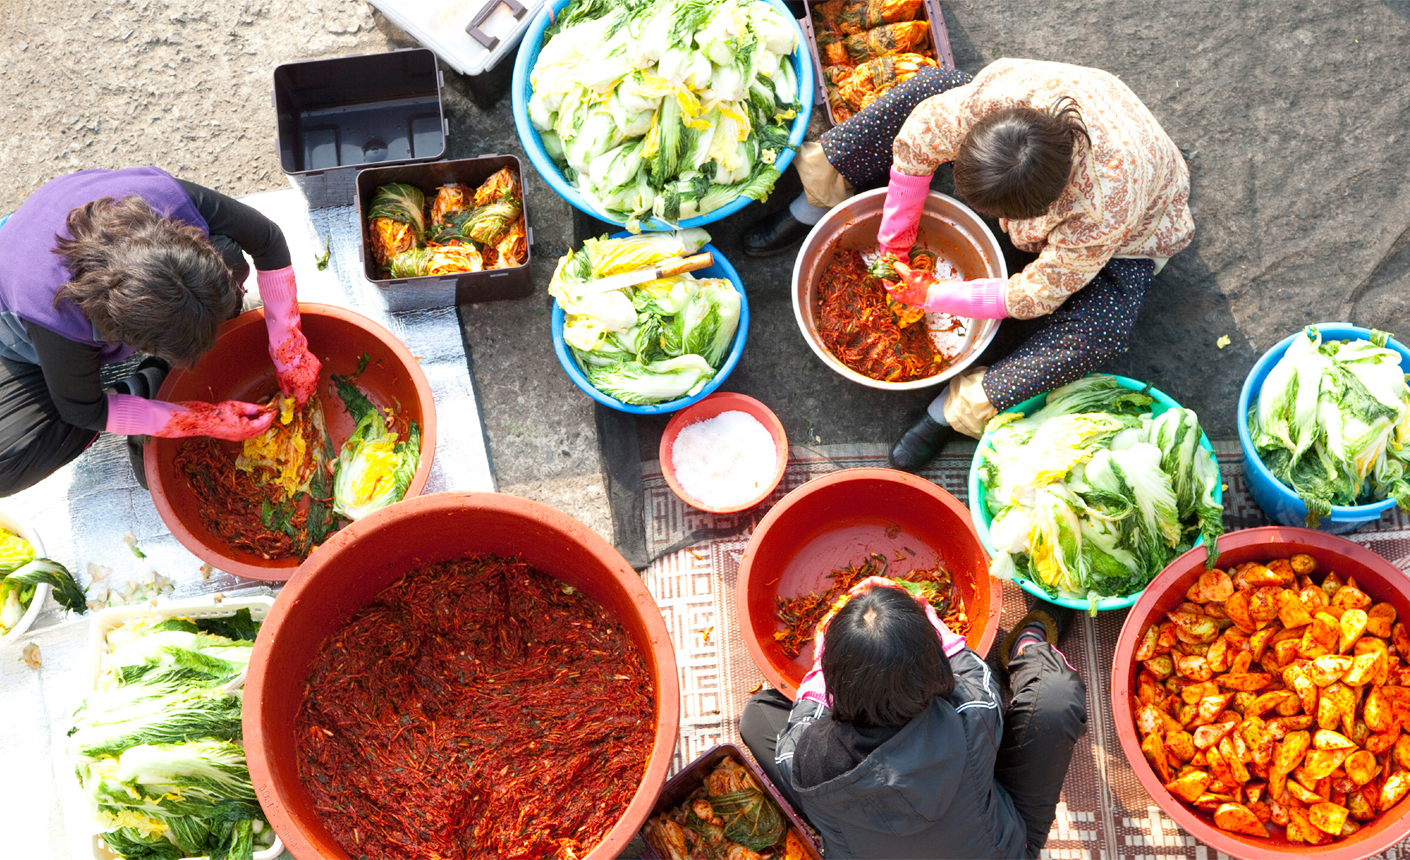 The Meaning of Kimchi: How Did Kimchi Become So Special to Koreans